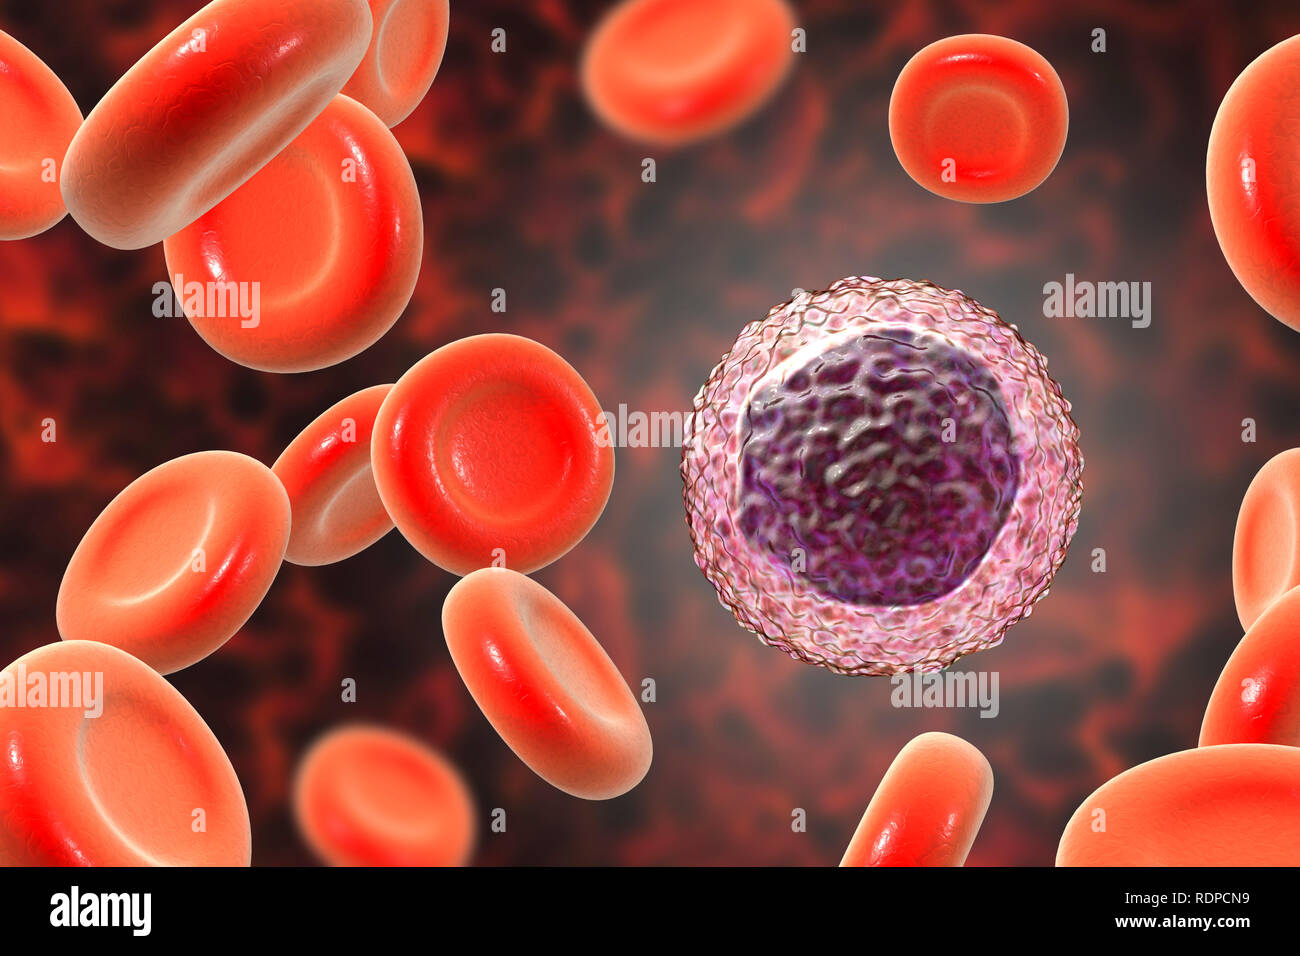 Lymphocyte White Blood Cells In A Blood Smear Computer Illustration